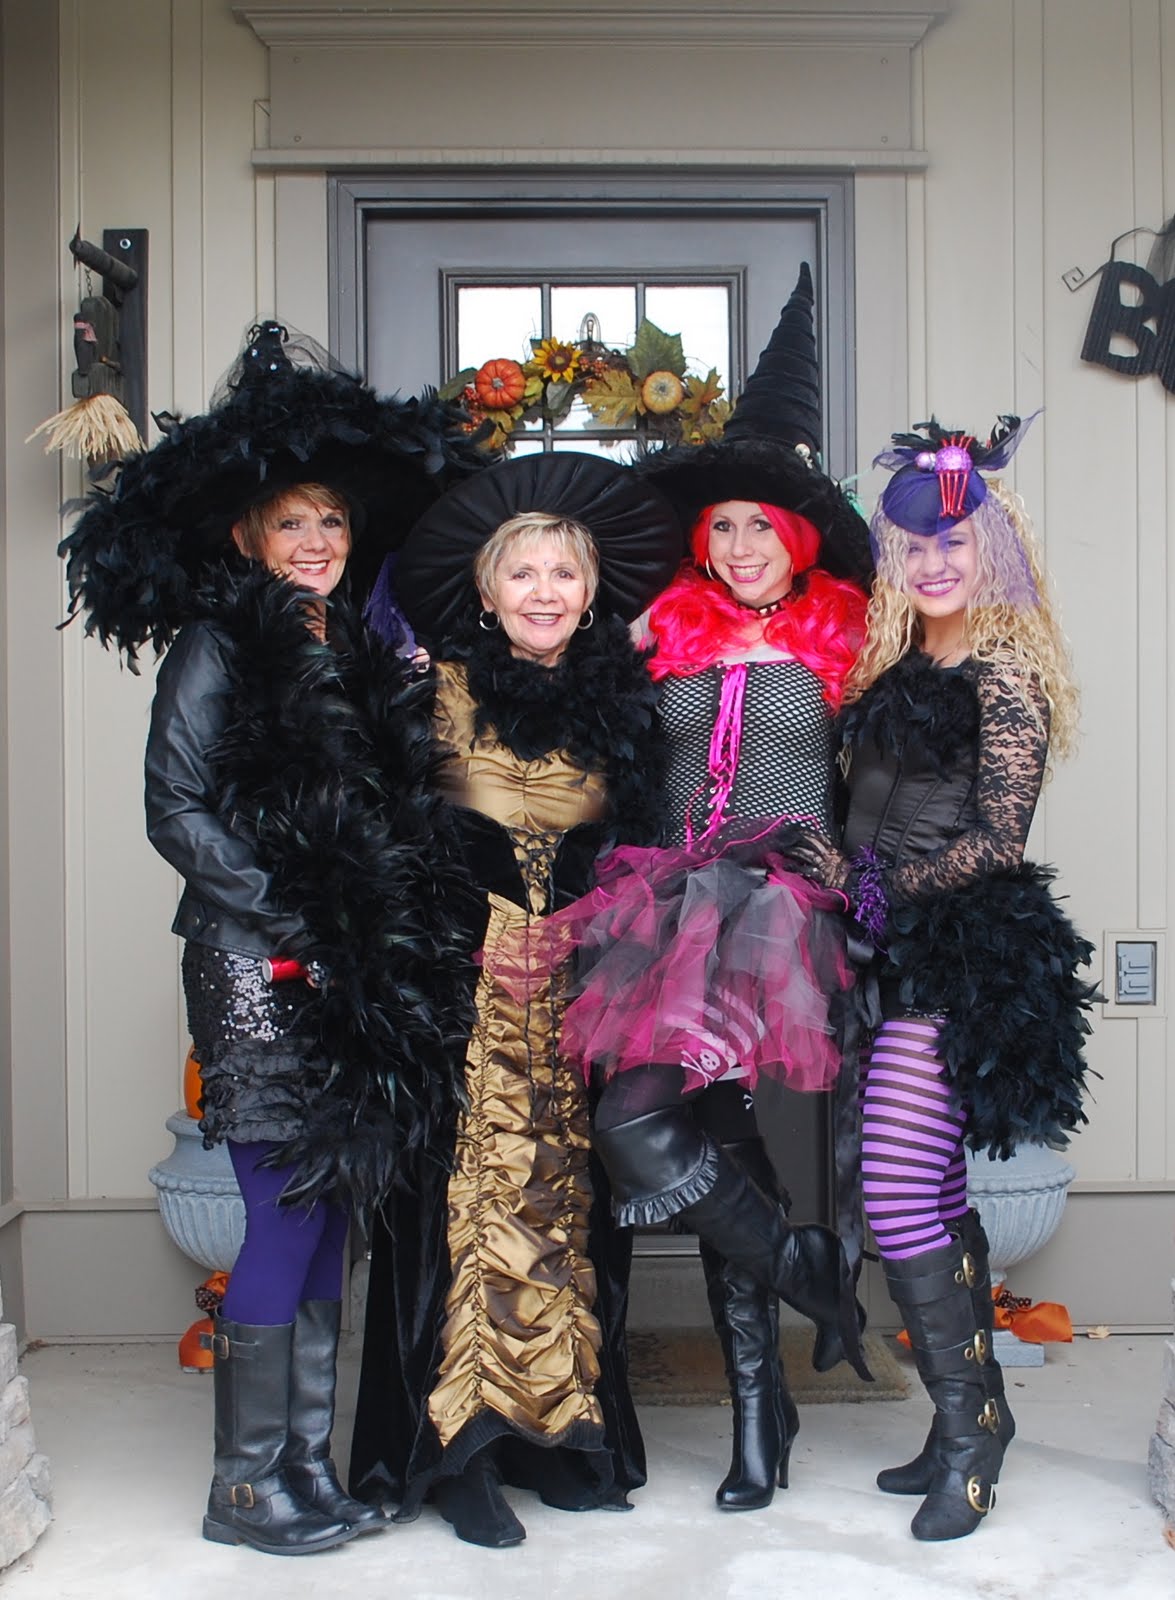 .Abbie's Blog: Witches Night Out